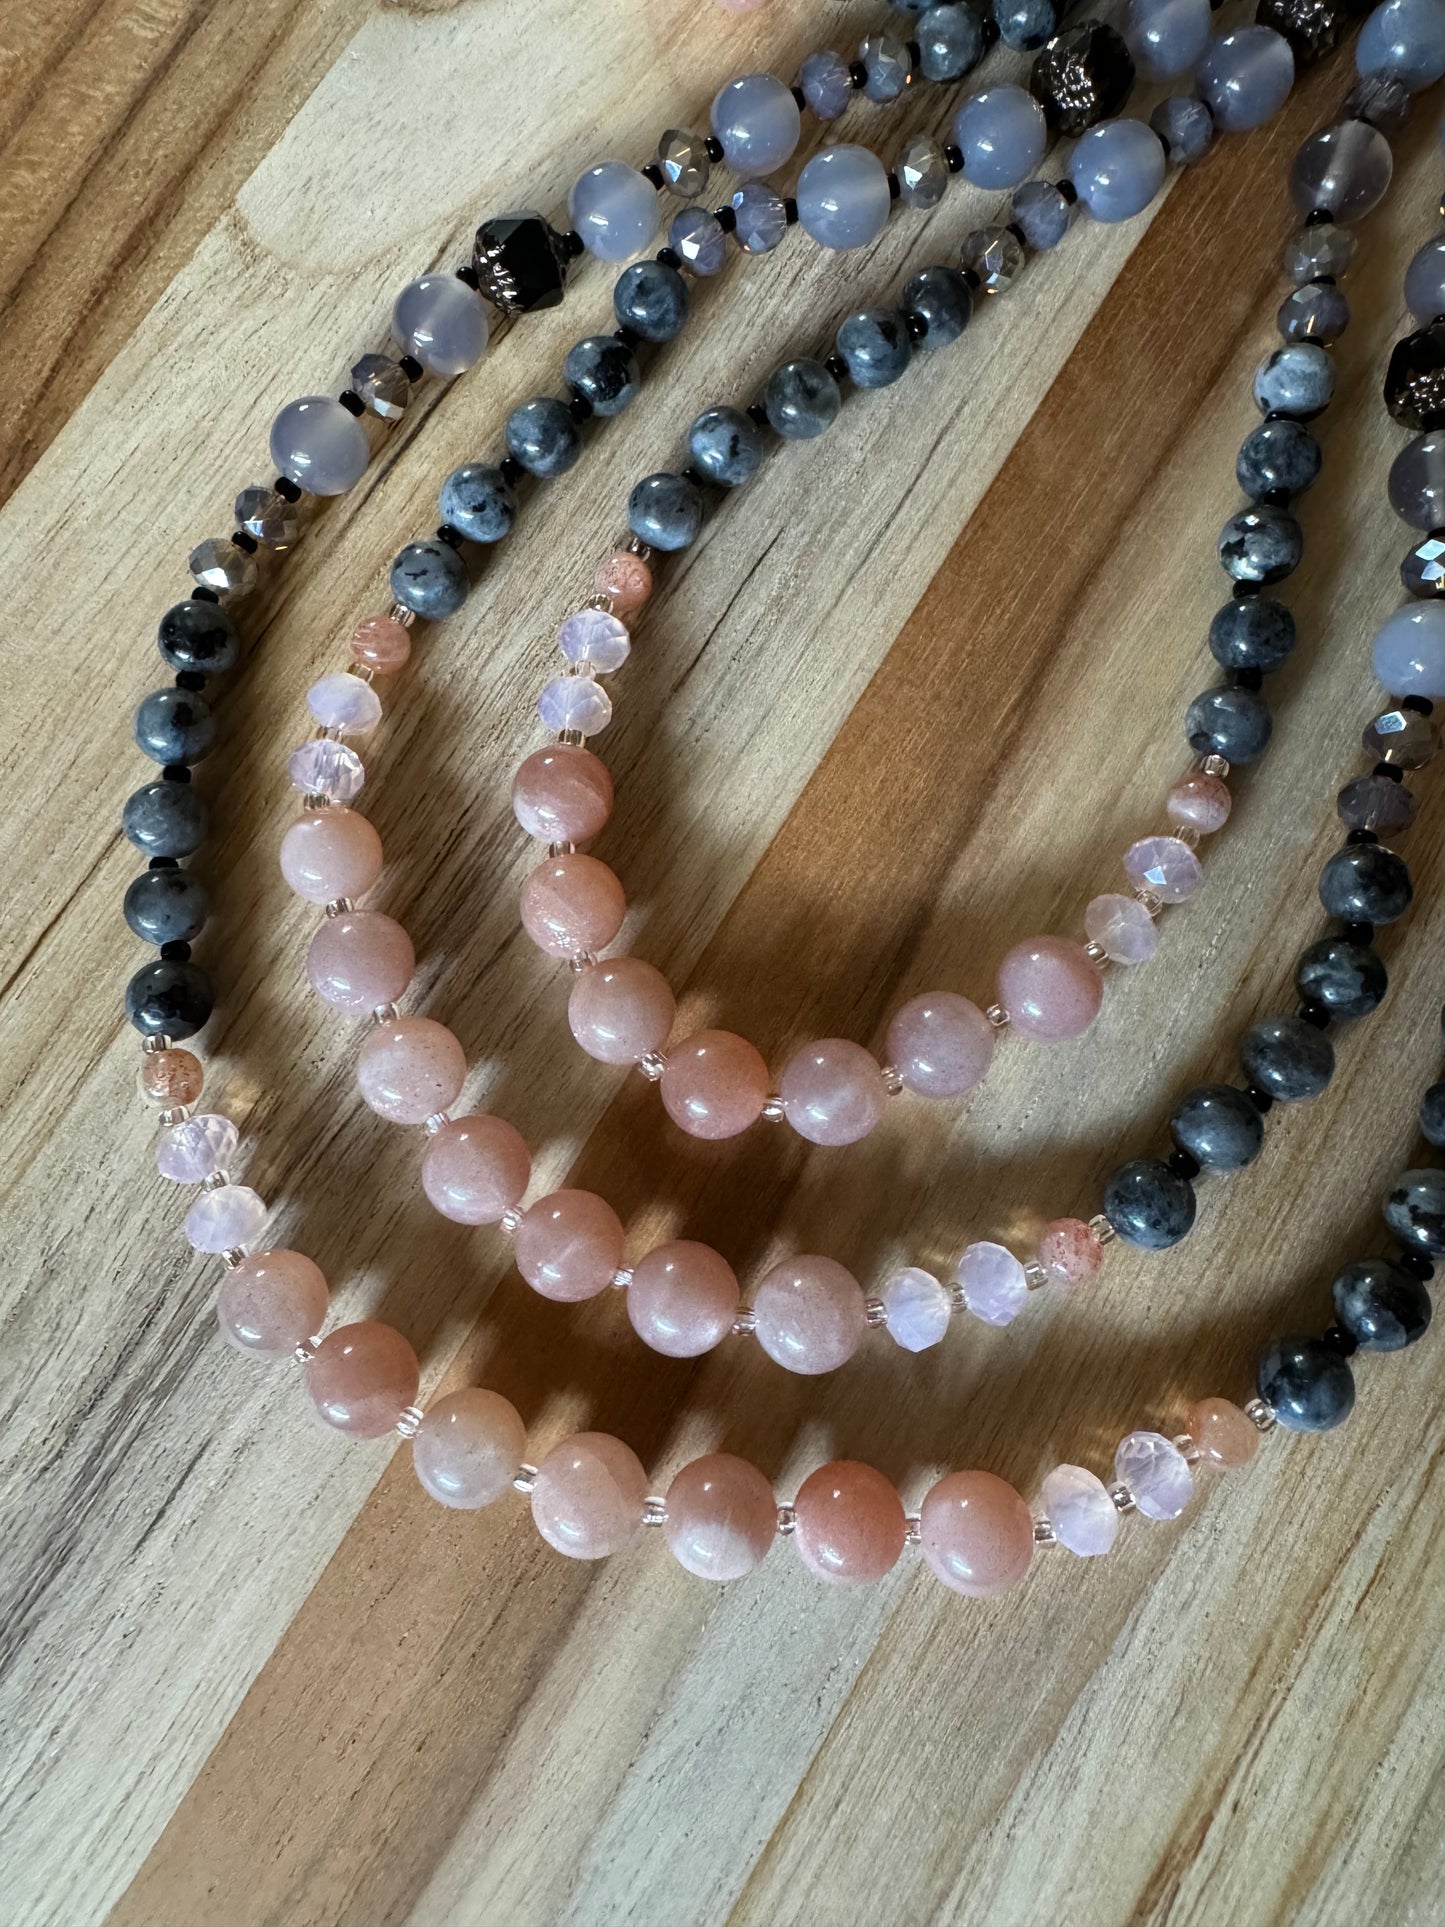 60” Extra Long Color Block Wraparound Style Beaded Necklace with Peach Sunstone Grey Agate Larvikite Black Czech Glass and Crystal Beads - My Urban Gems